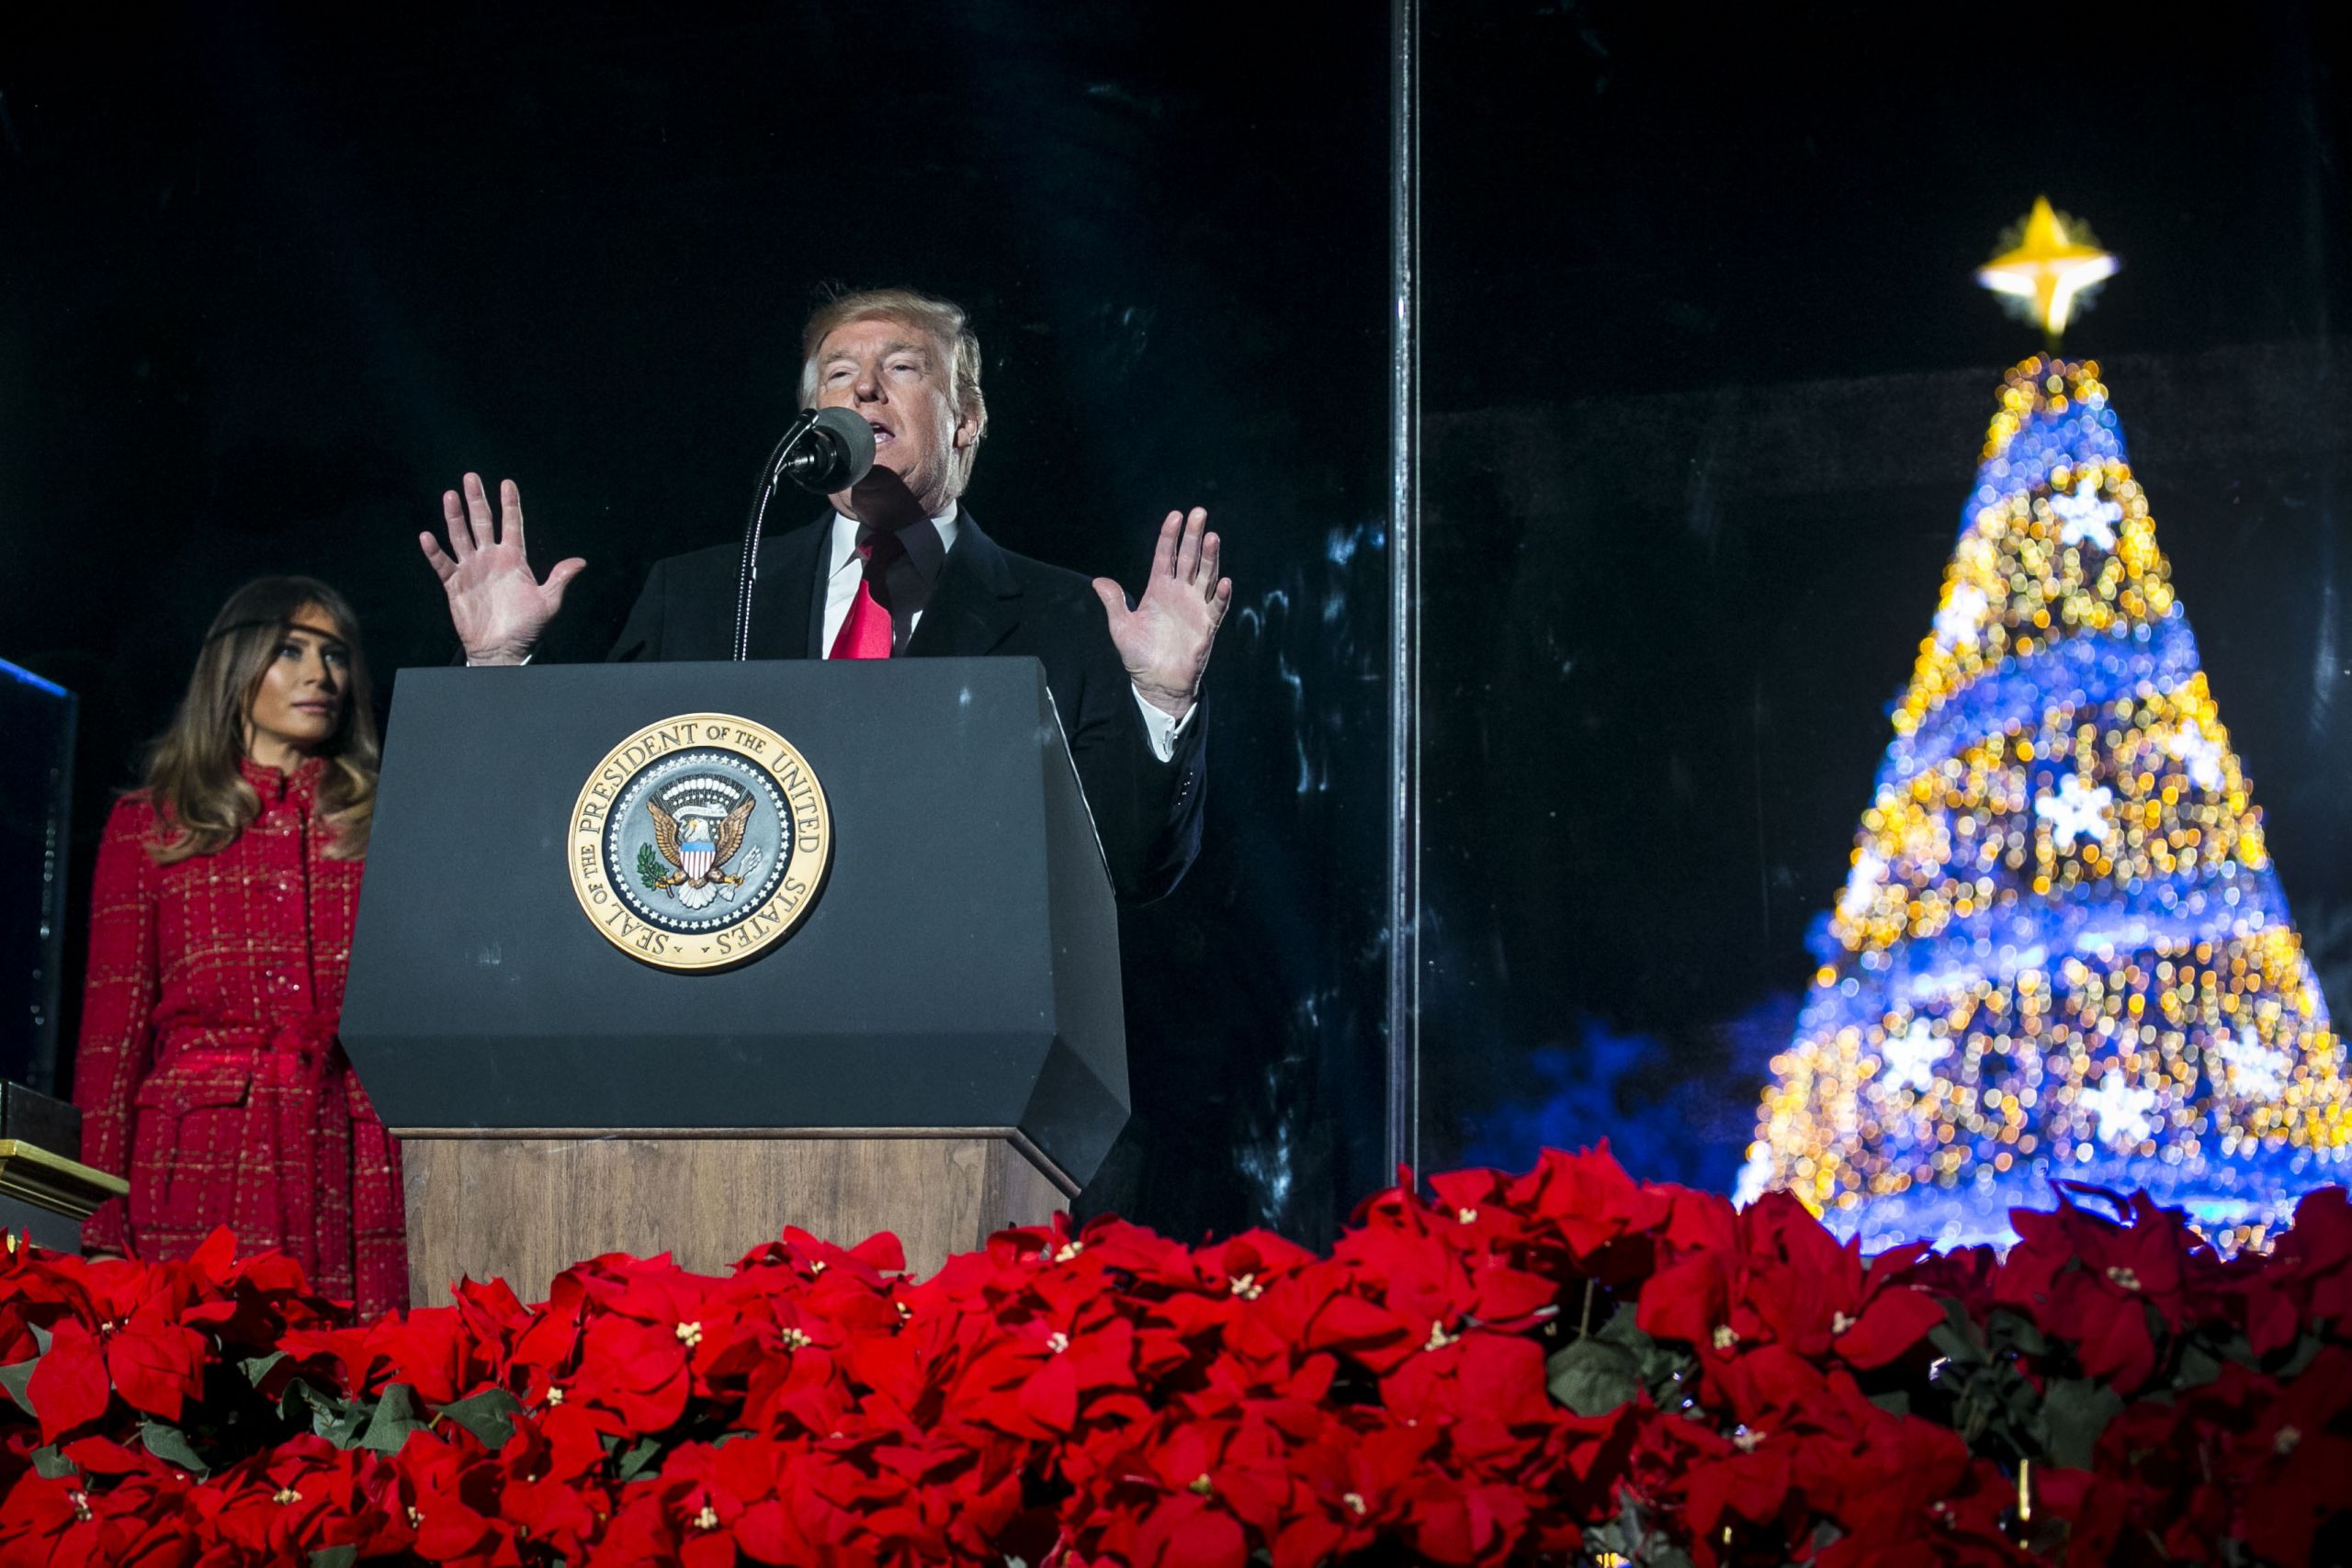 Trump Christmas Tree Lighting
 Twitter Ridicules Trump For Small Crowd At Christmas Tree